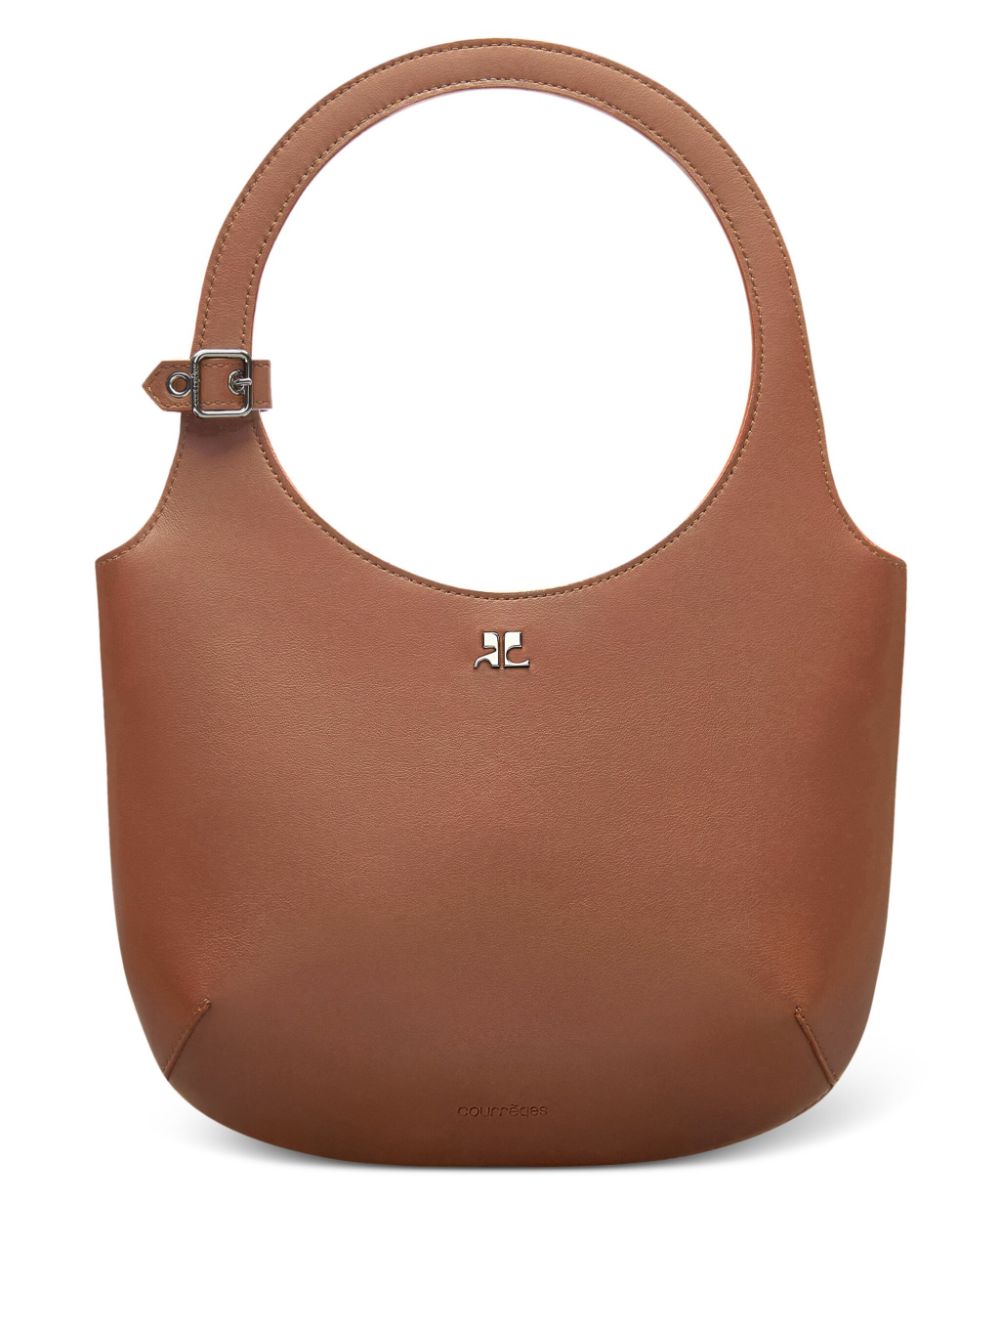 Courrèges small Holy leather tote bag - Brown